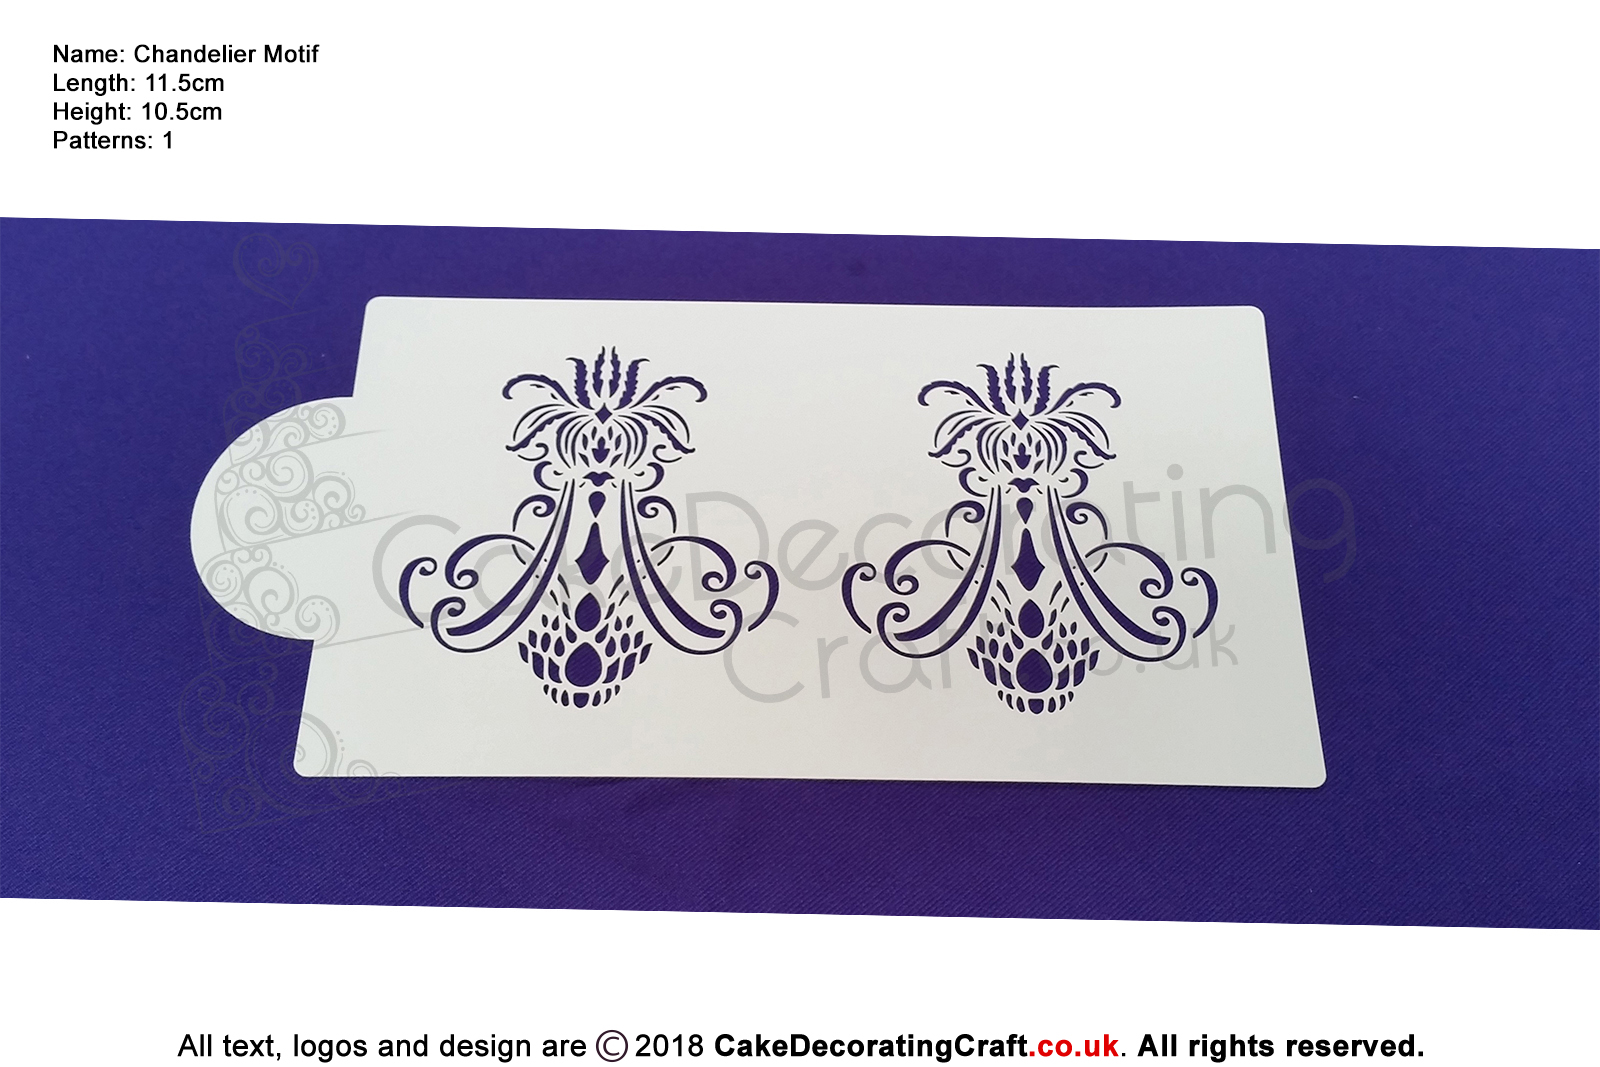 Chandelier Motif | Air Brush Stenciling | Cake and Cupcake Decorating Craft Tool